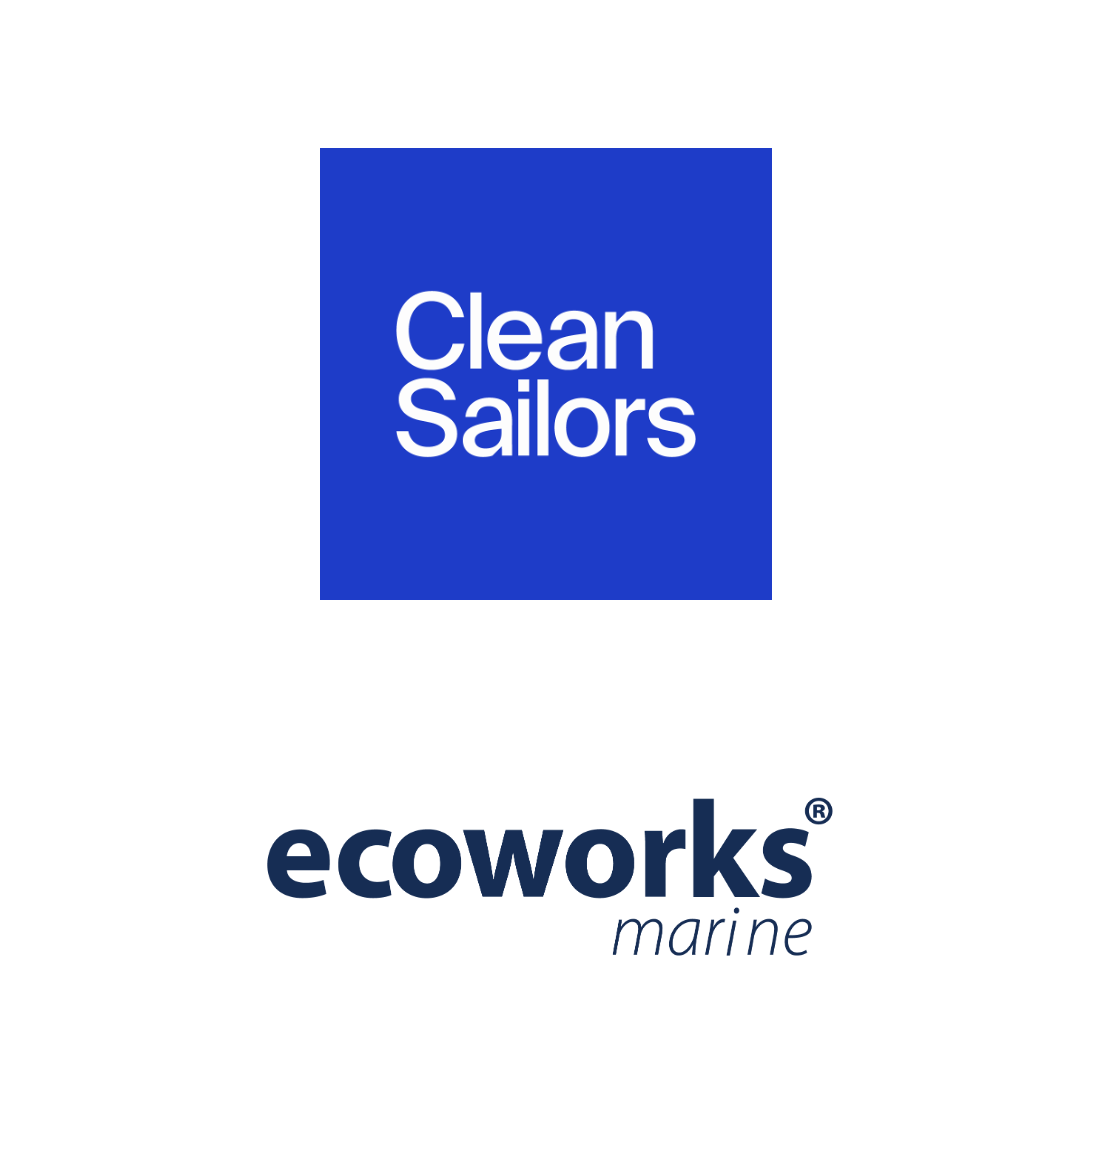 Clean Sailors and Ecoworks Marine team up to further promote cleaner practices within sailing and yachting